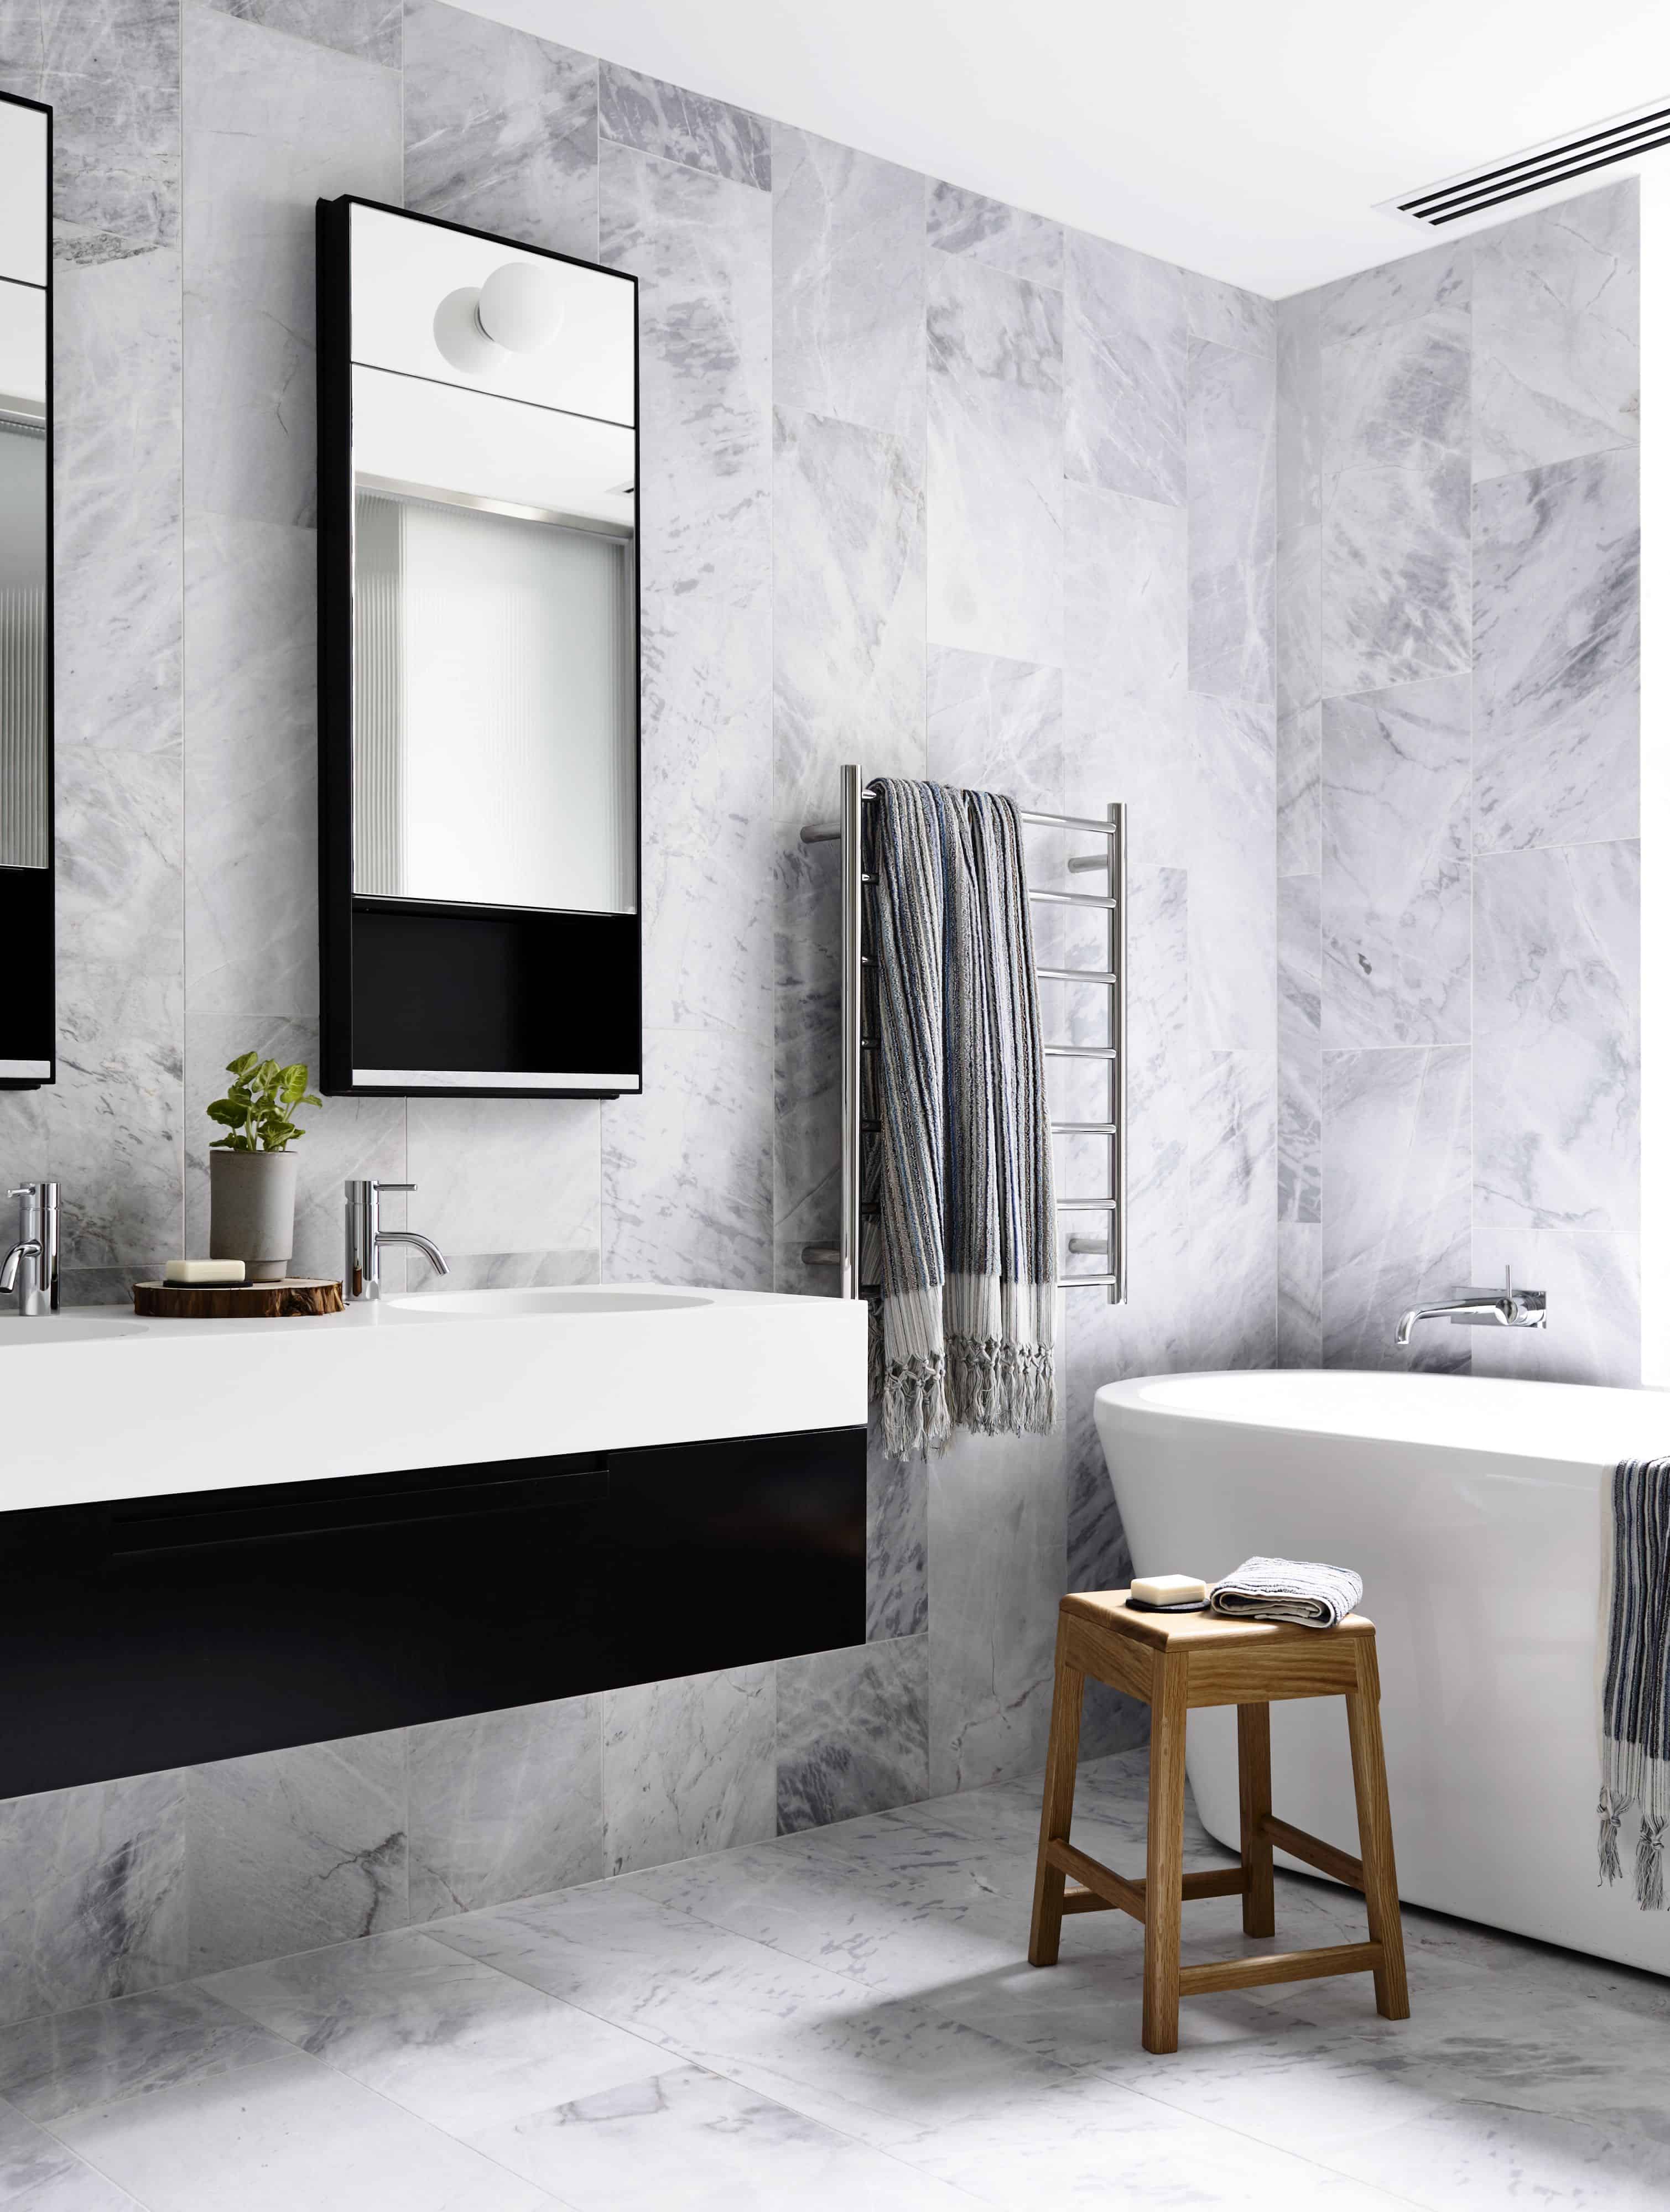 white and gray marble